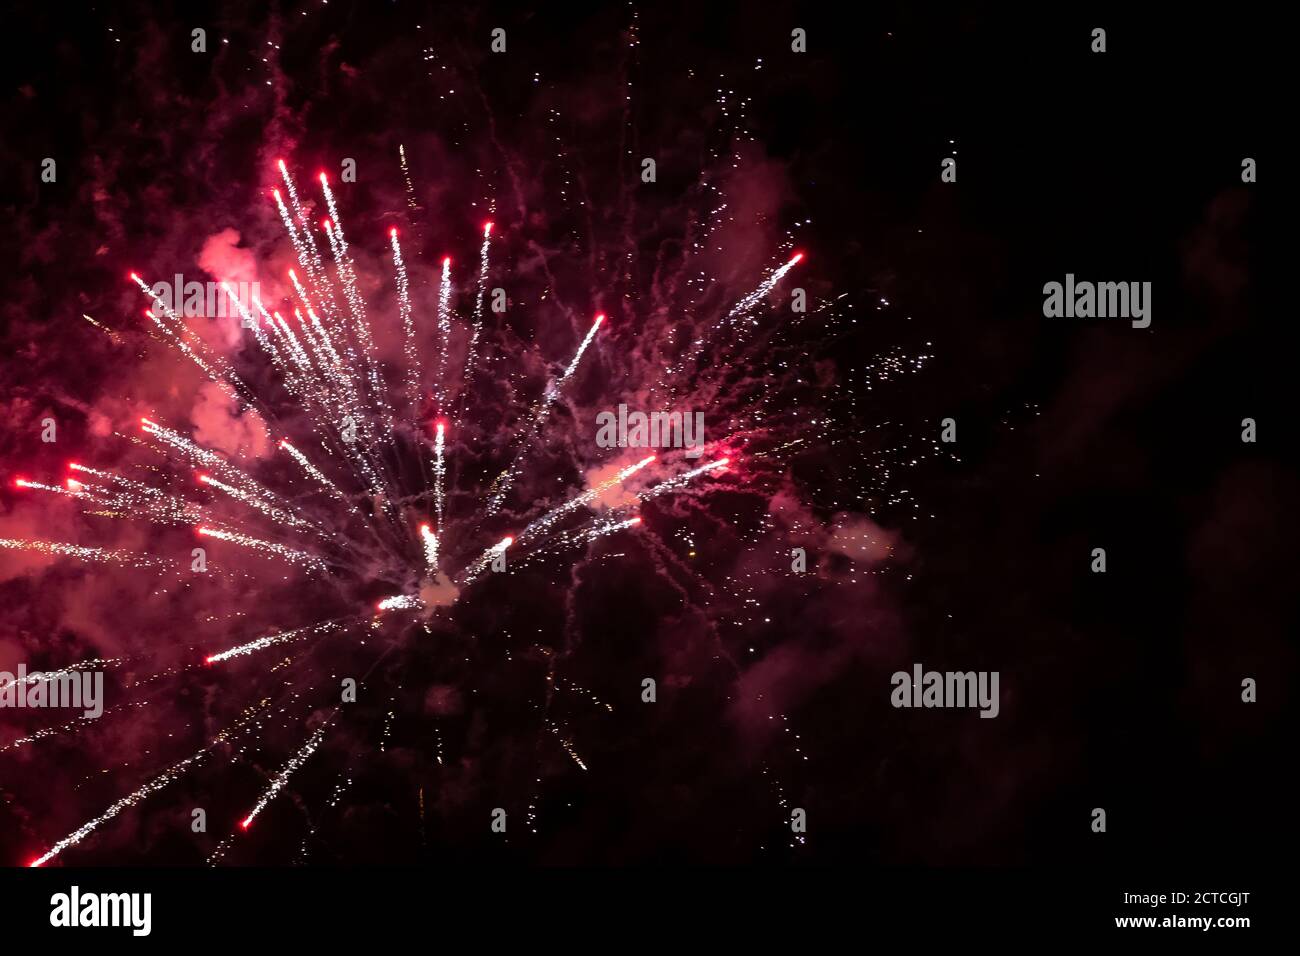 Festive background explosion of fireworks and red smoke. Stock Photo